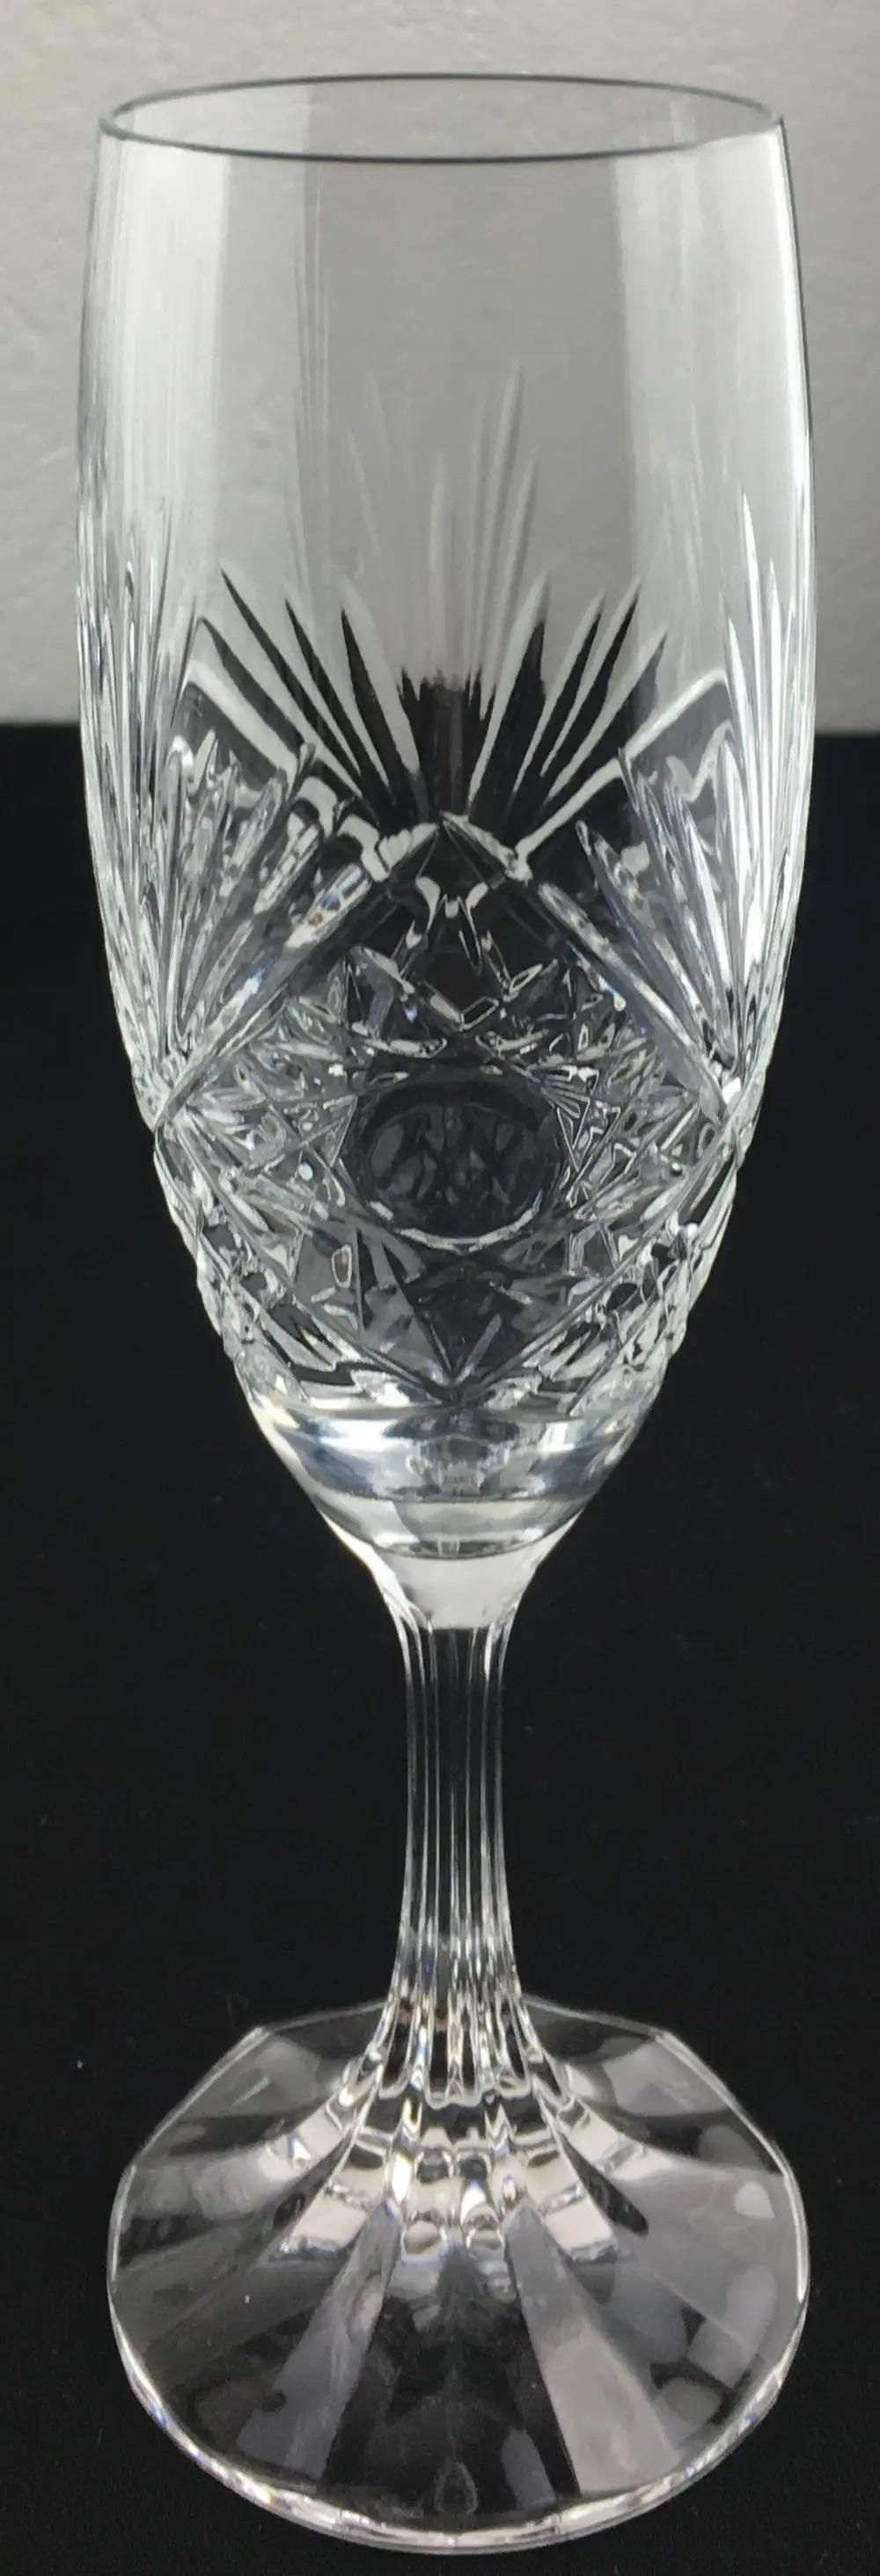 A truly elegant and fine quality Baccarat crystal champagne flutes, set of 8 still available. Beautiful details that will enhance any table and delight your guests. Designed by Valery Klein.

Each glass bears the Baccarat etched mark and references